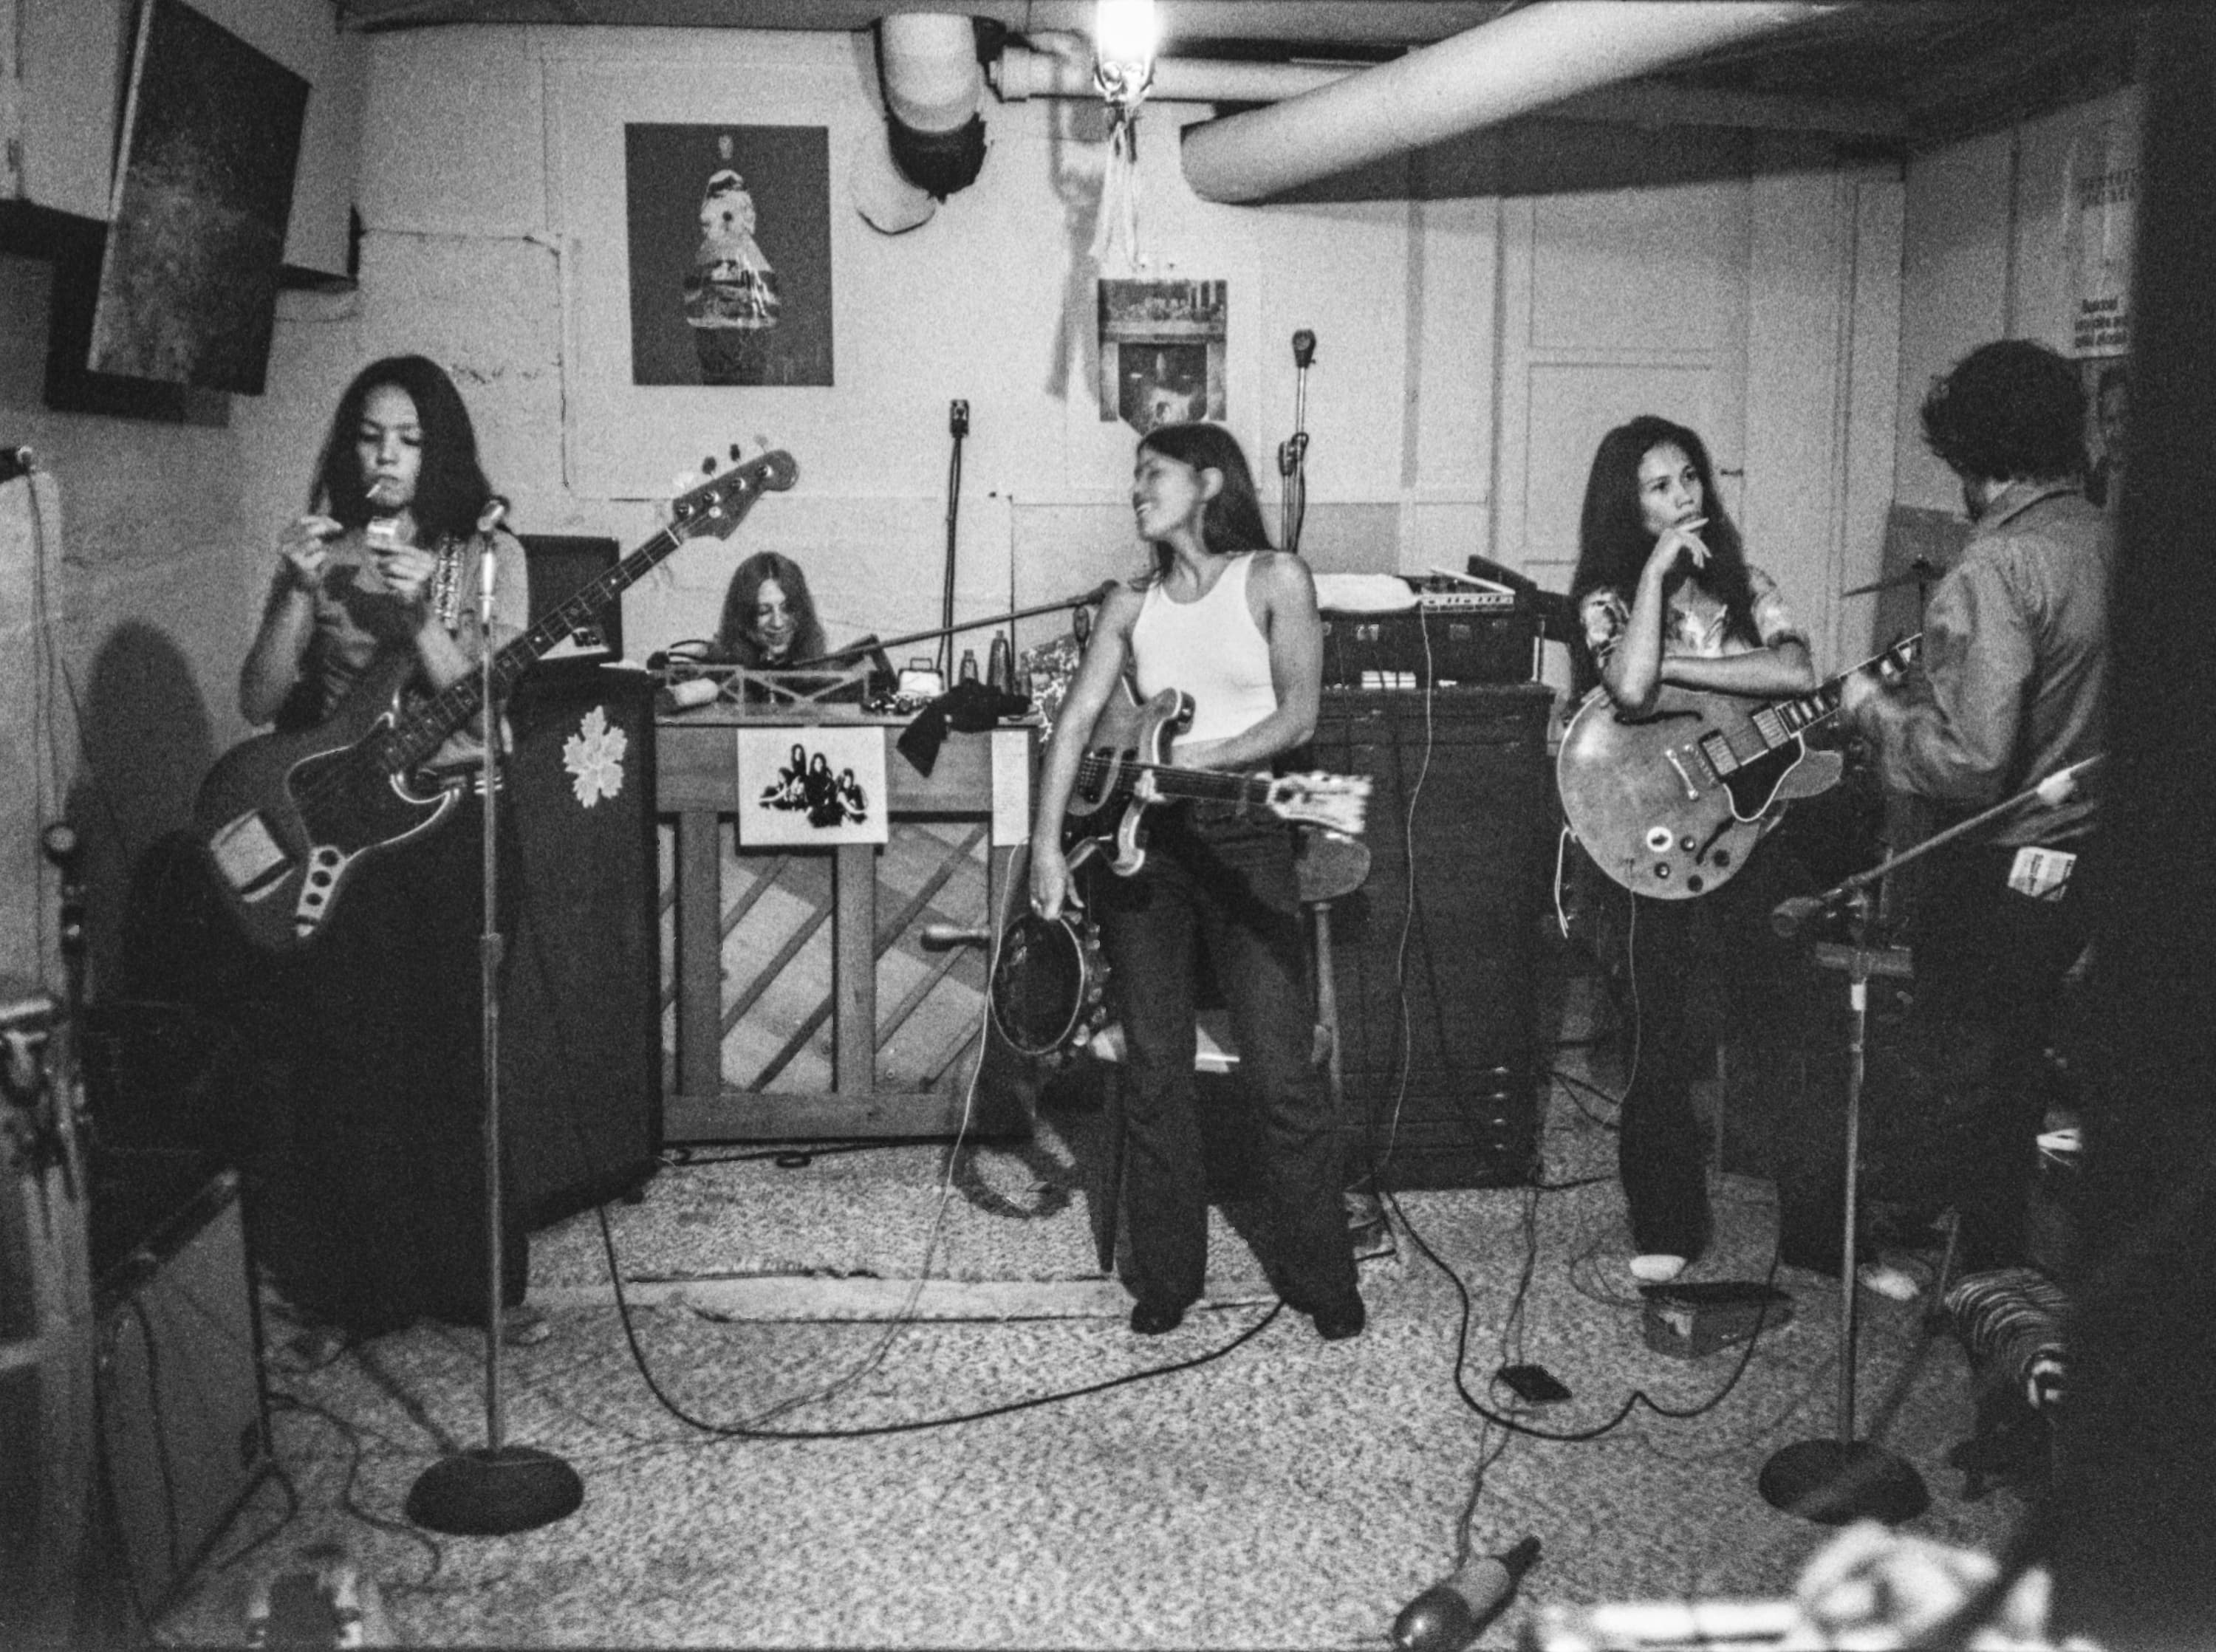 The all-female rock band Fanny made five albums between 1970 and 1975. A new documentary about the band opens at the Boston Women's Film Festival. (Courtesy Linda Wolf)